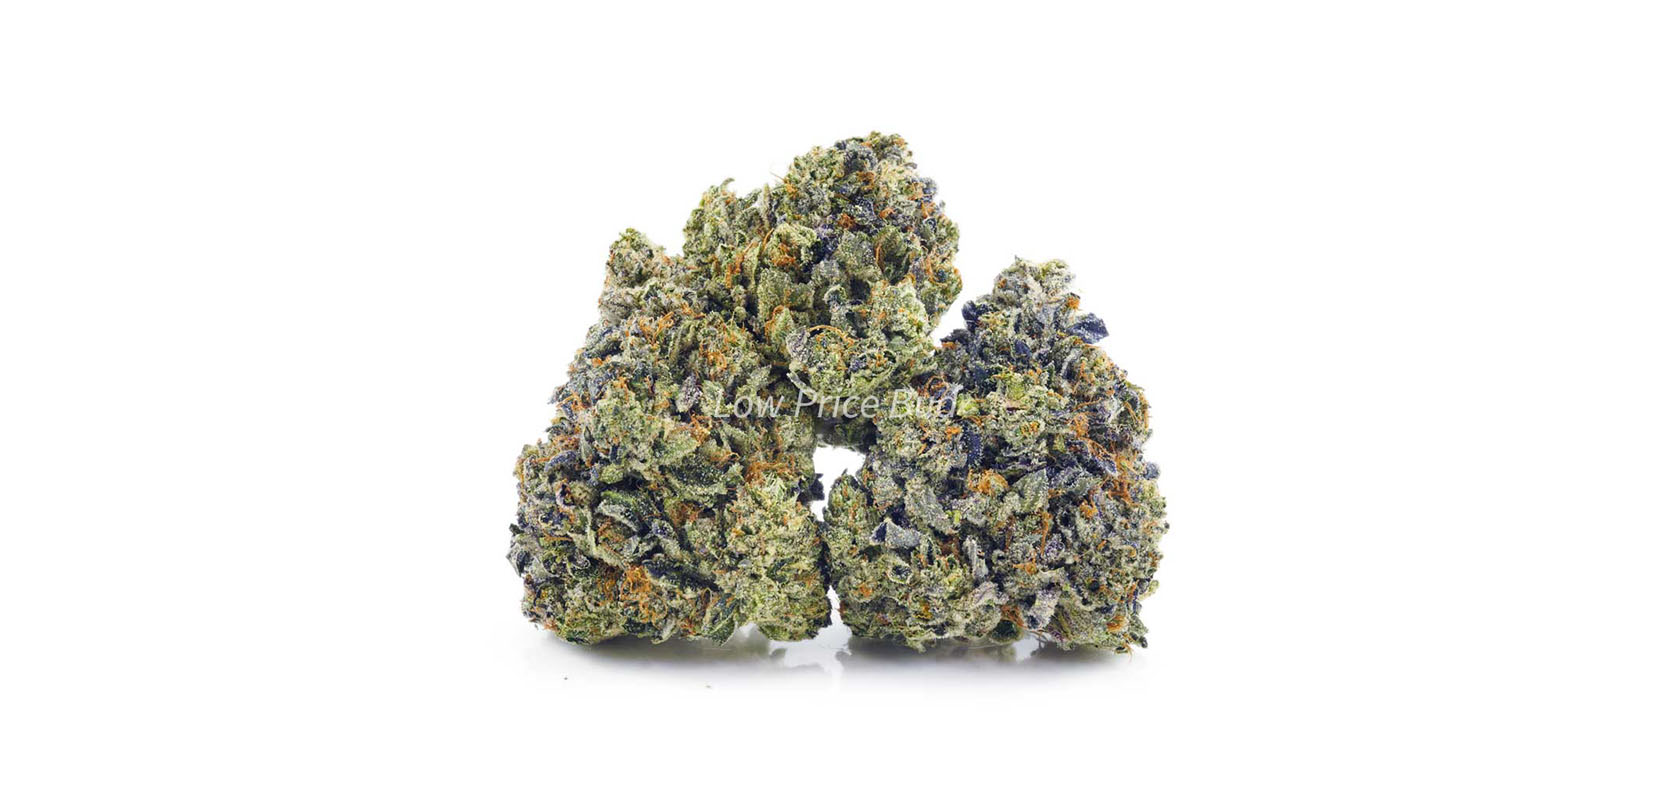 Daniel Larusso weed online Canada. Buy value buds at BC cannabis weed store and online dispensary for weed delivery Canada.